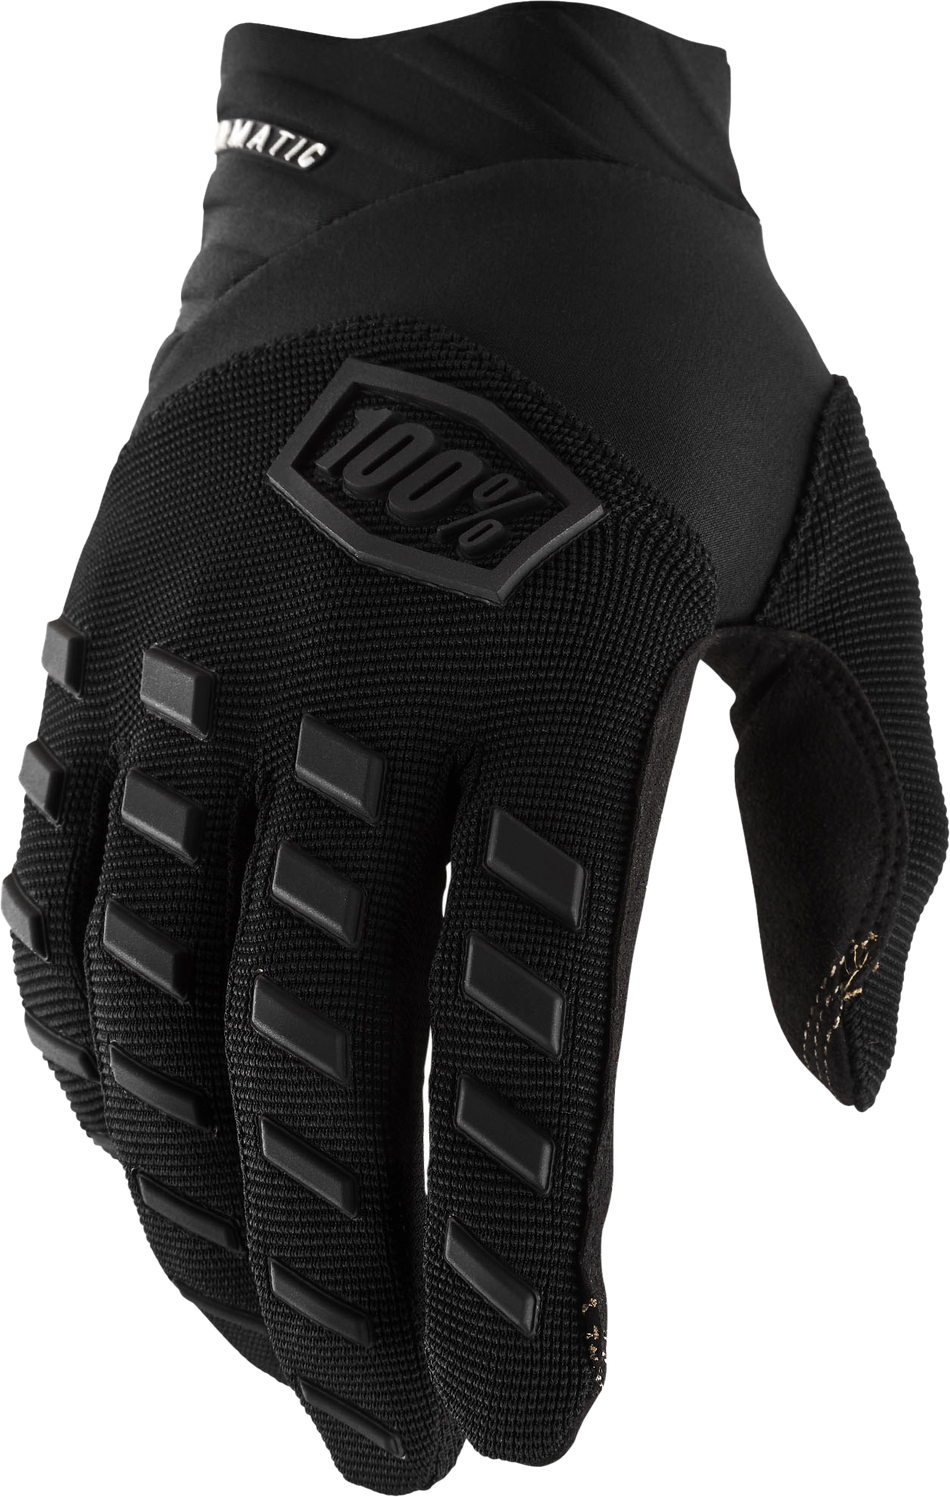 100% Airmatic Gloves Black/Charcoal Sm 10000-00000